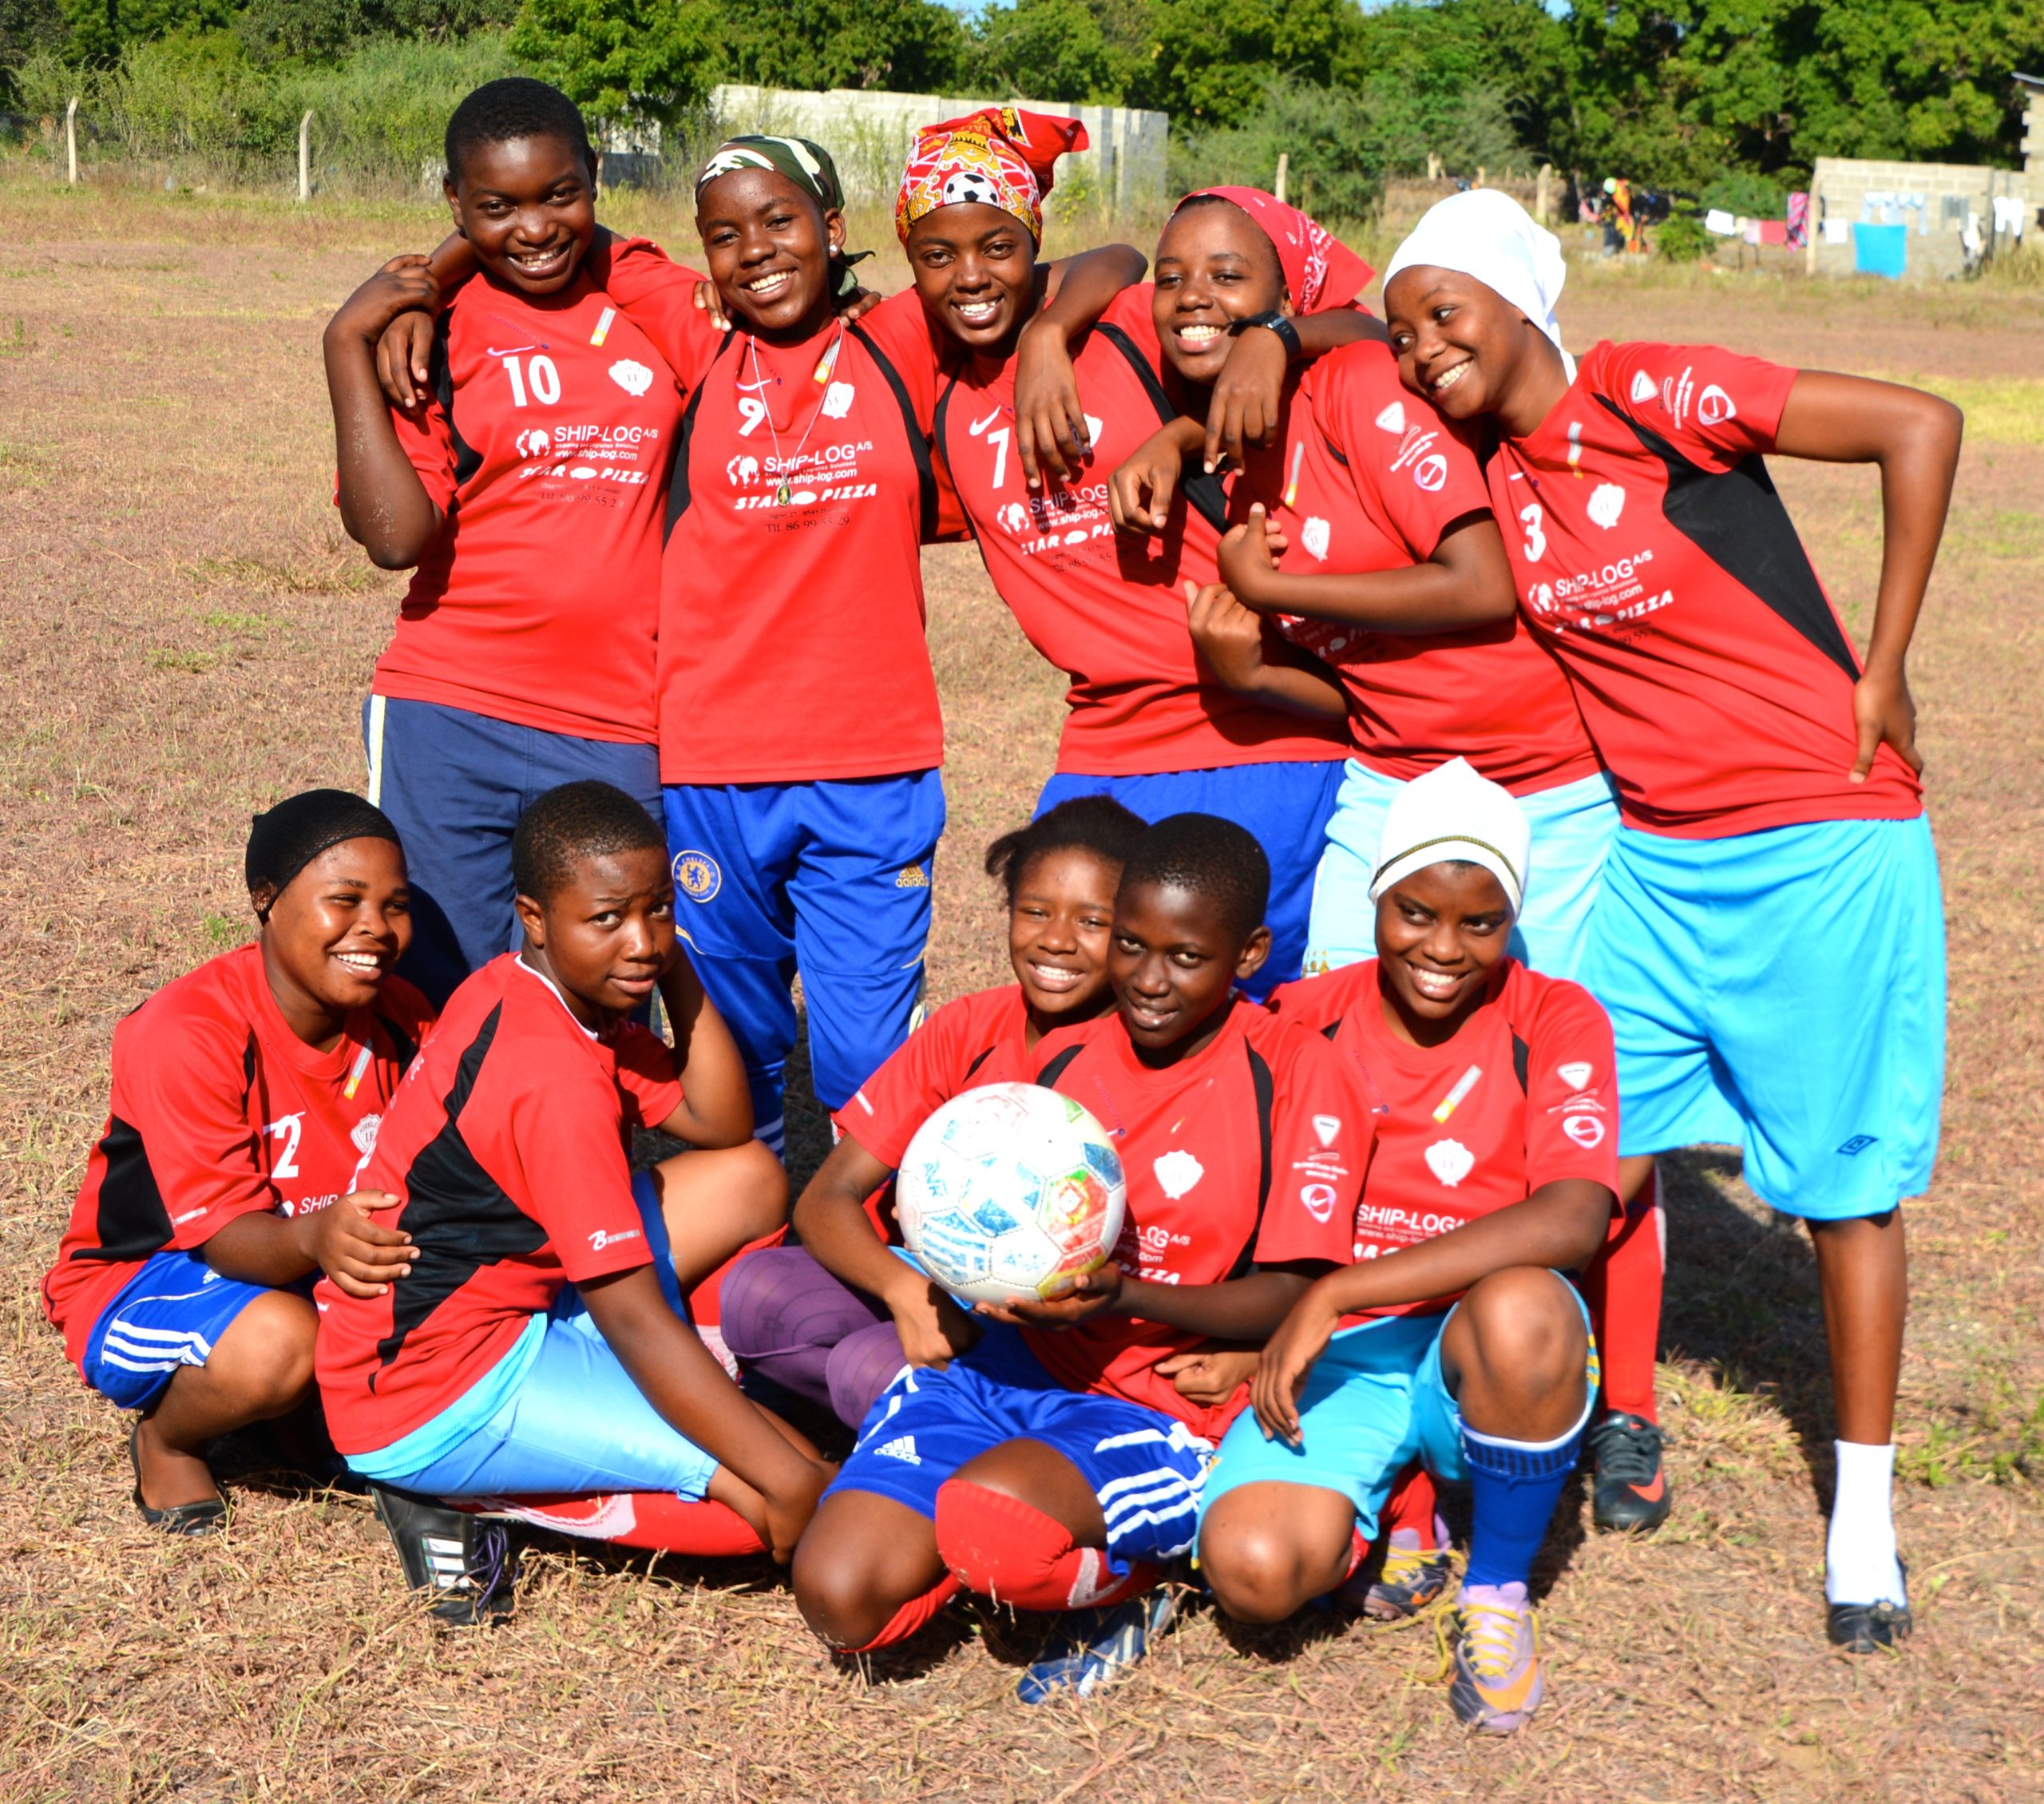 2014 students pose with a soccer ball on a field outside